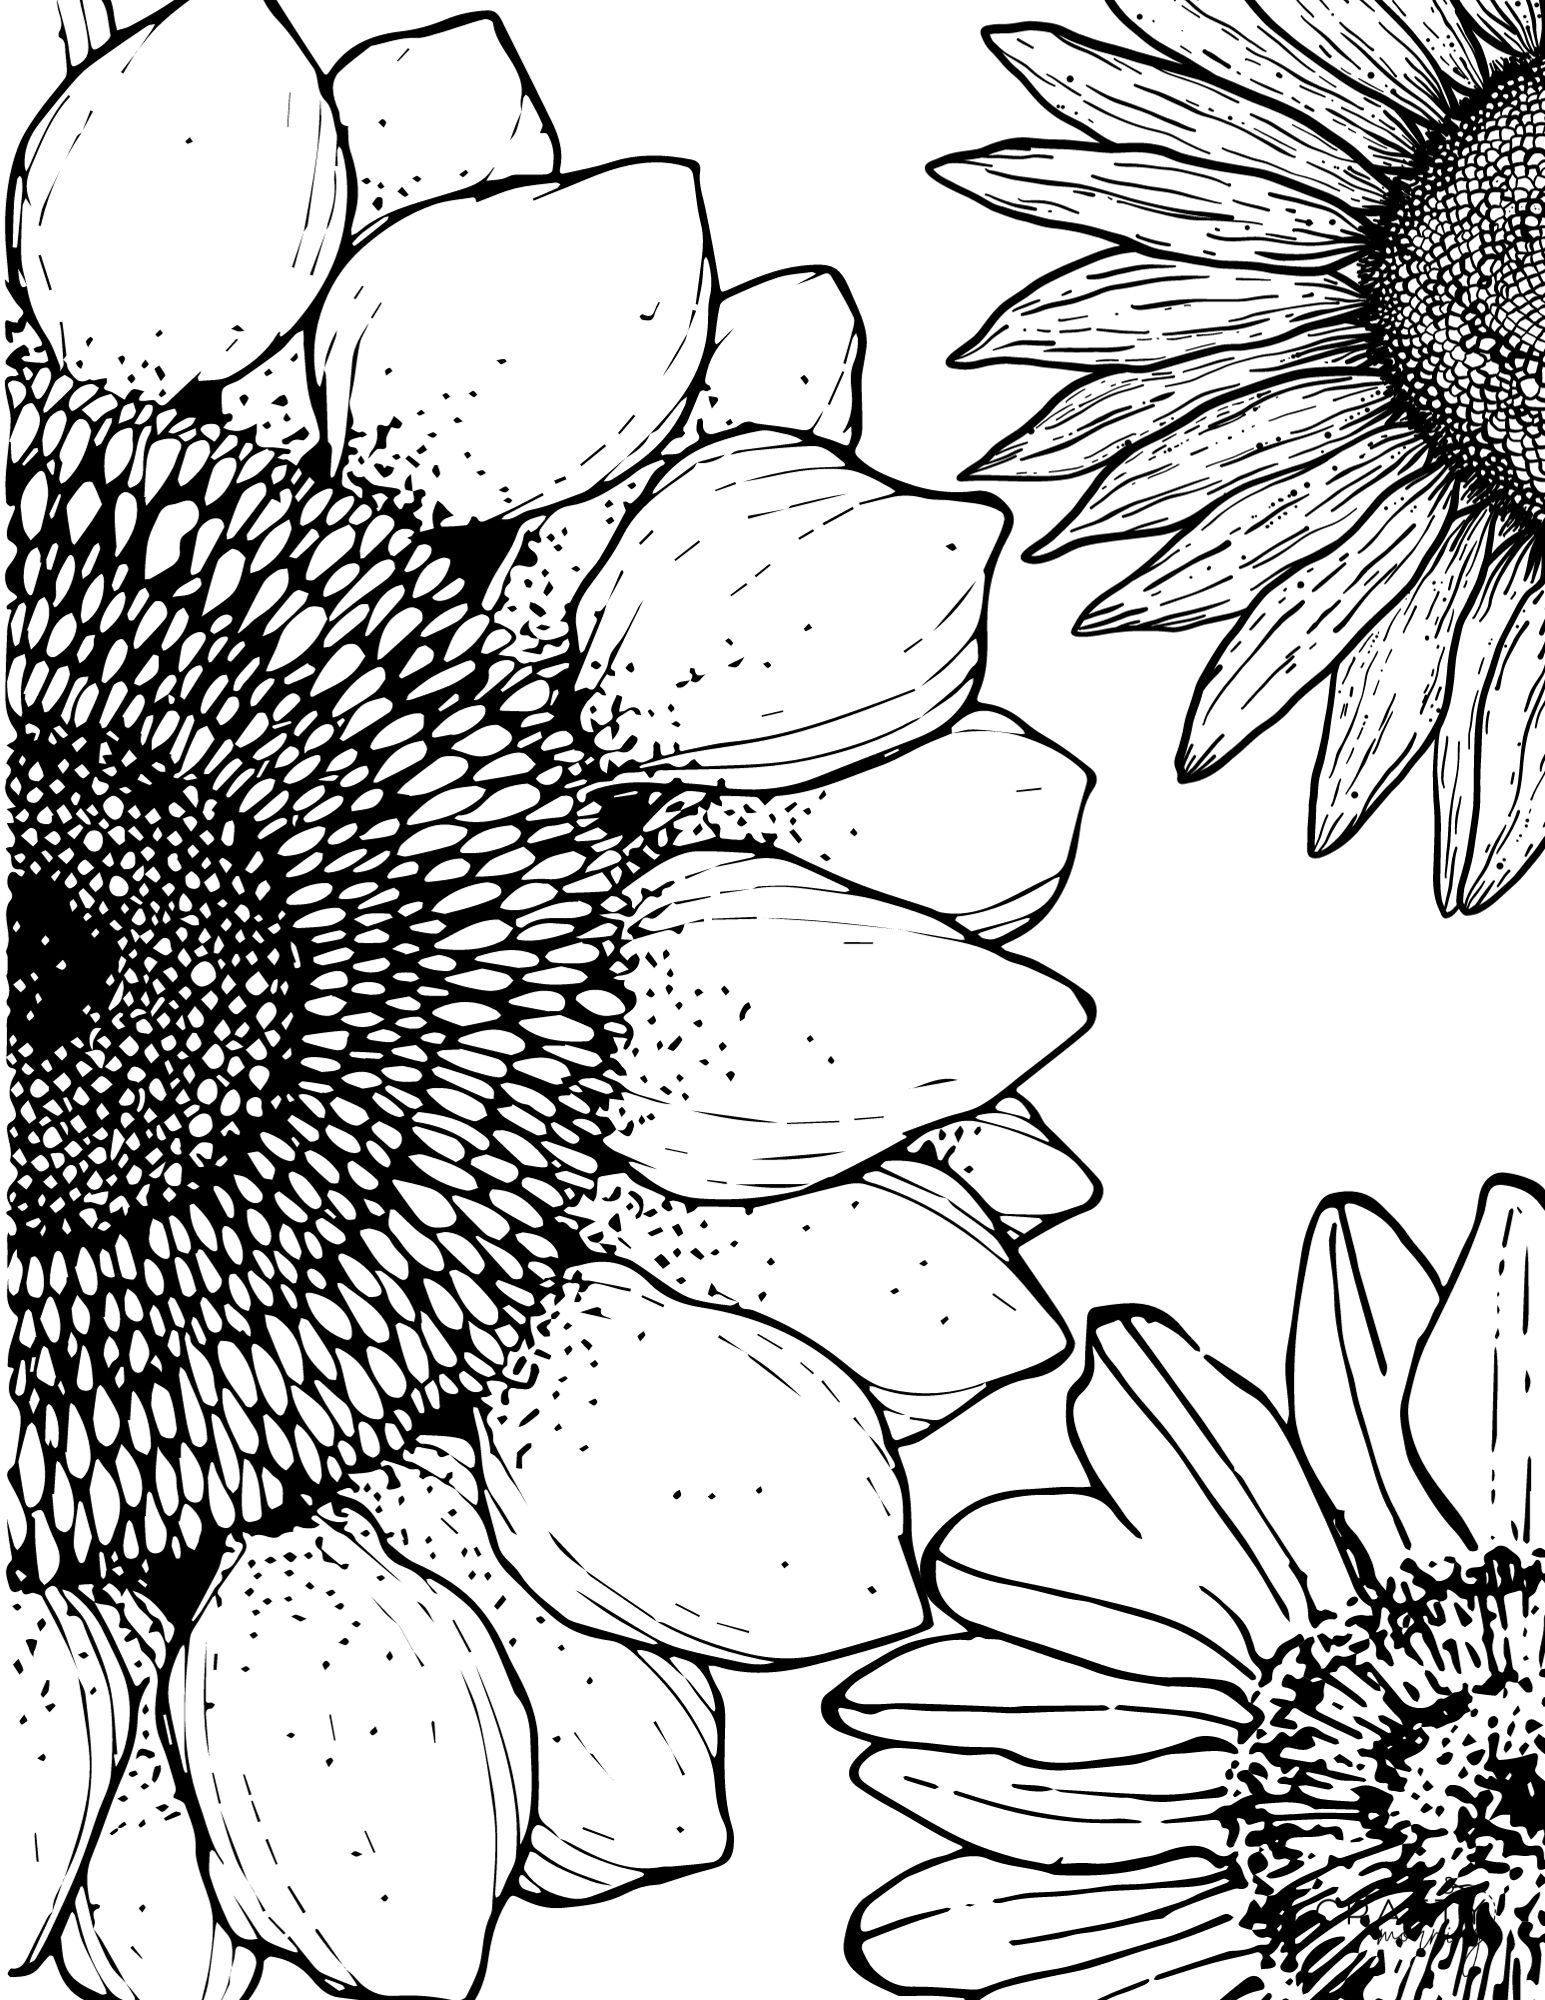 Free printable sunflower coloring pages